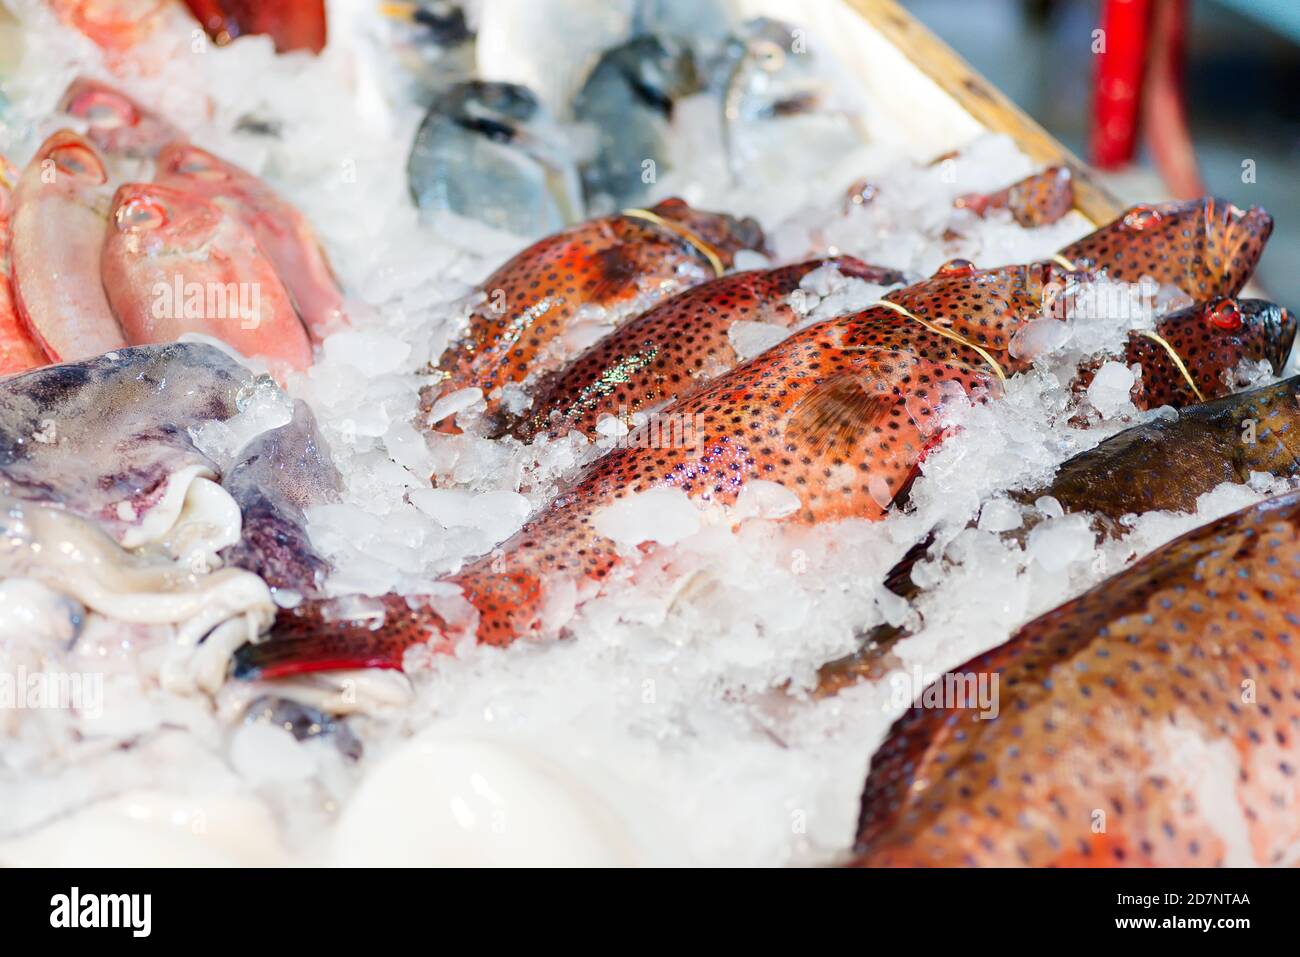 Freshly caught uncooked natural raw uncooked colorful sea fish with ice cubes on a market counter. Close up view. Sea delicacy food. Stock Photo